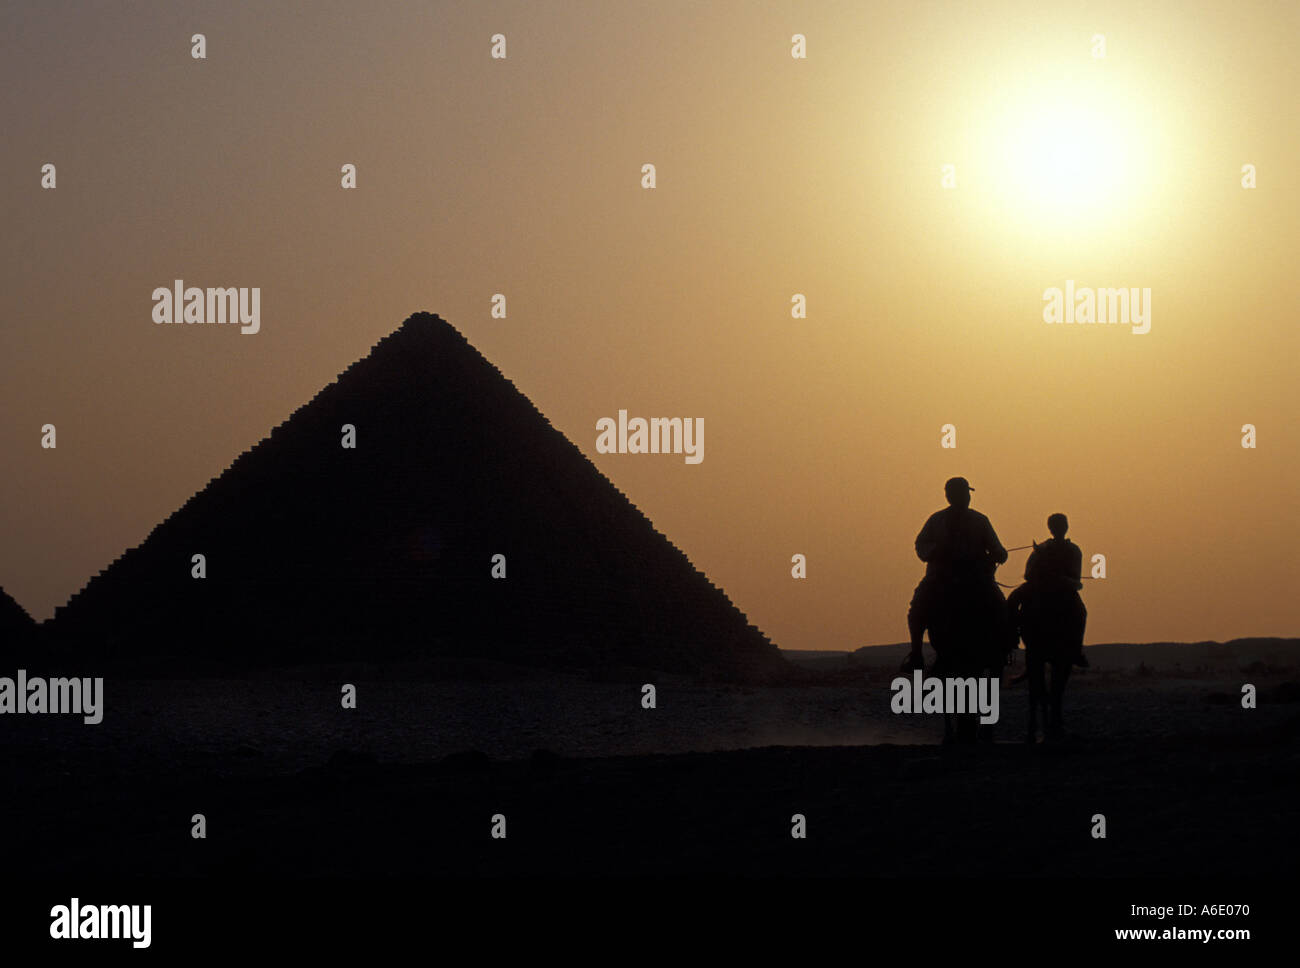 Father and Son Taking a Horse Ride near Great Pyramids of Giza at Sunset (Egypt) Stock Photo